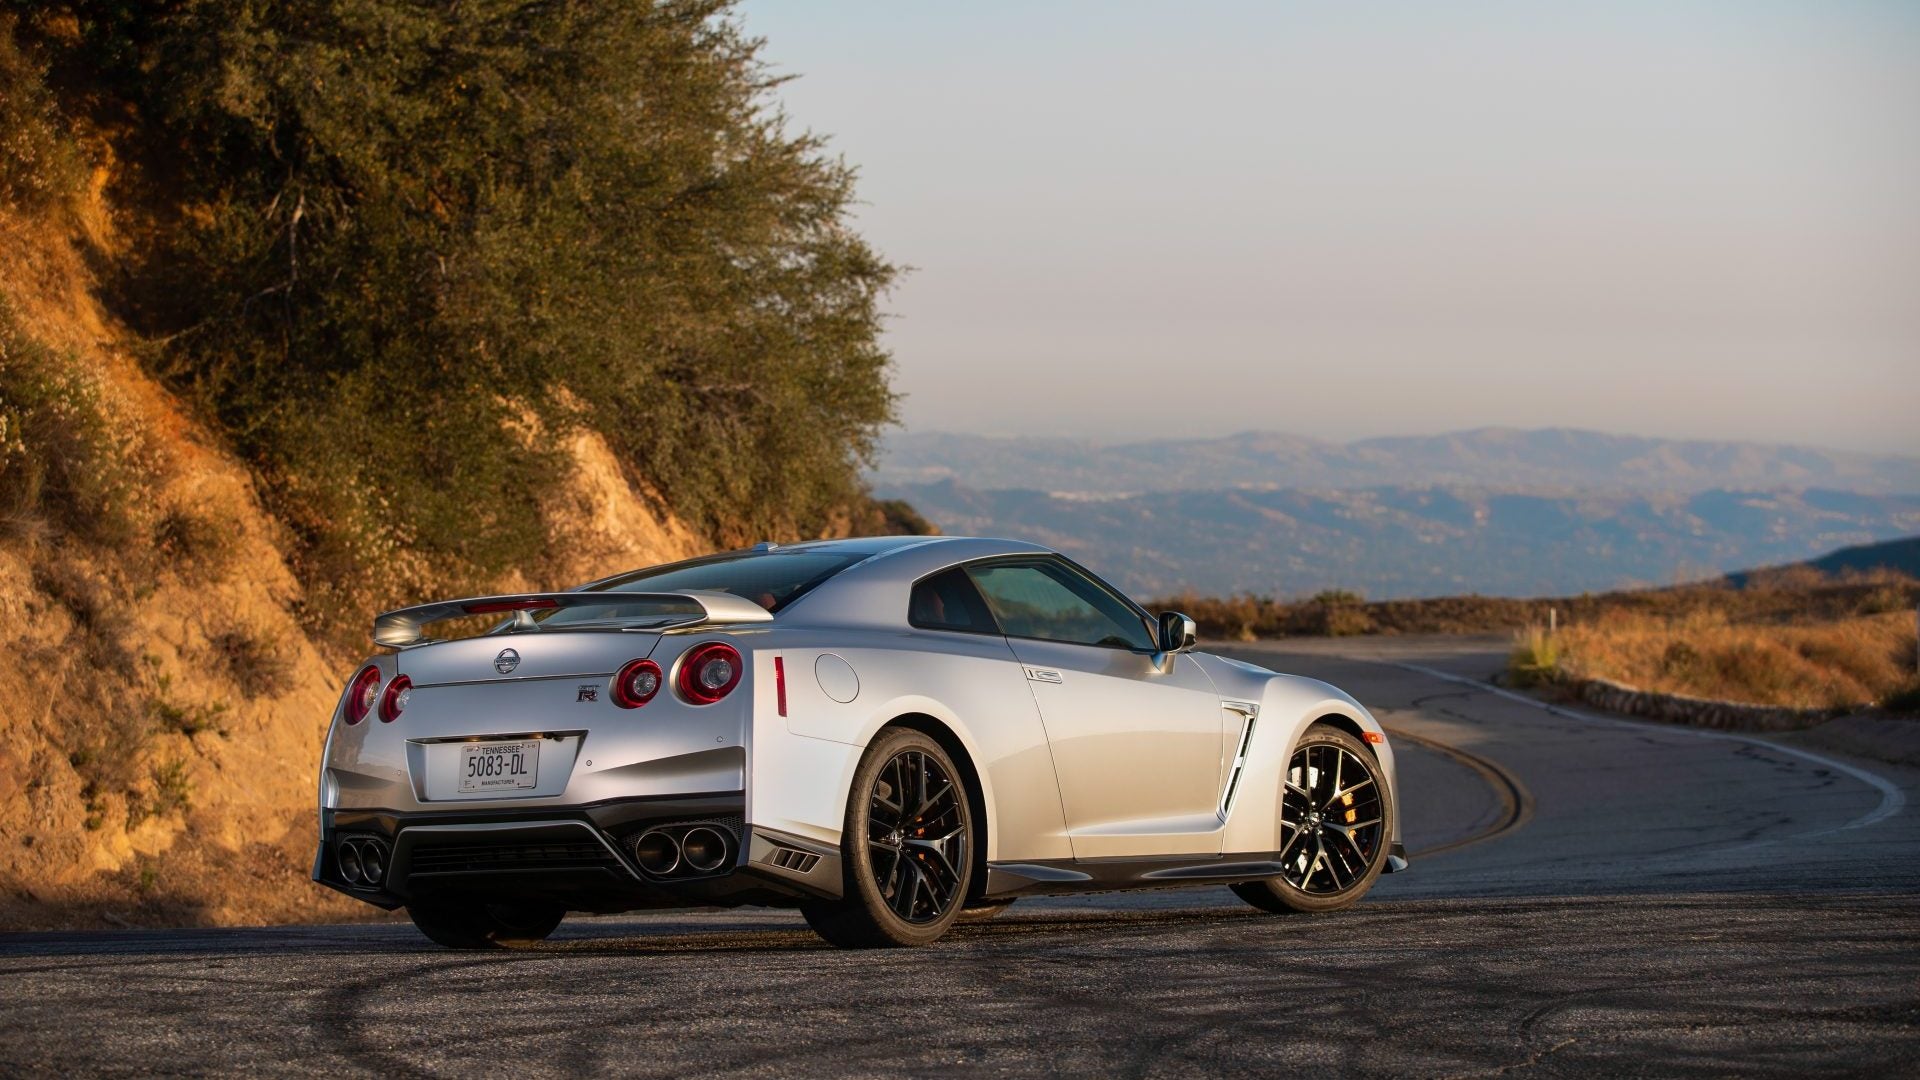 2019 Nissan GTR There Ain't No Rest for the Wicked The